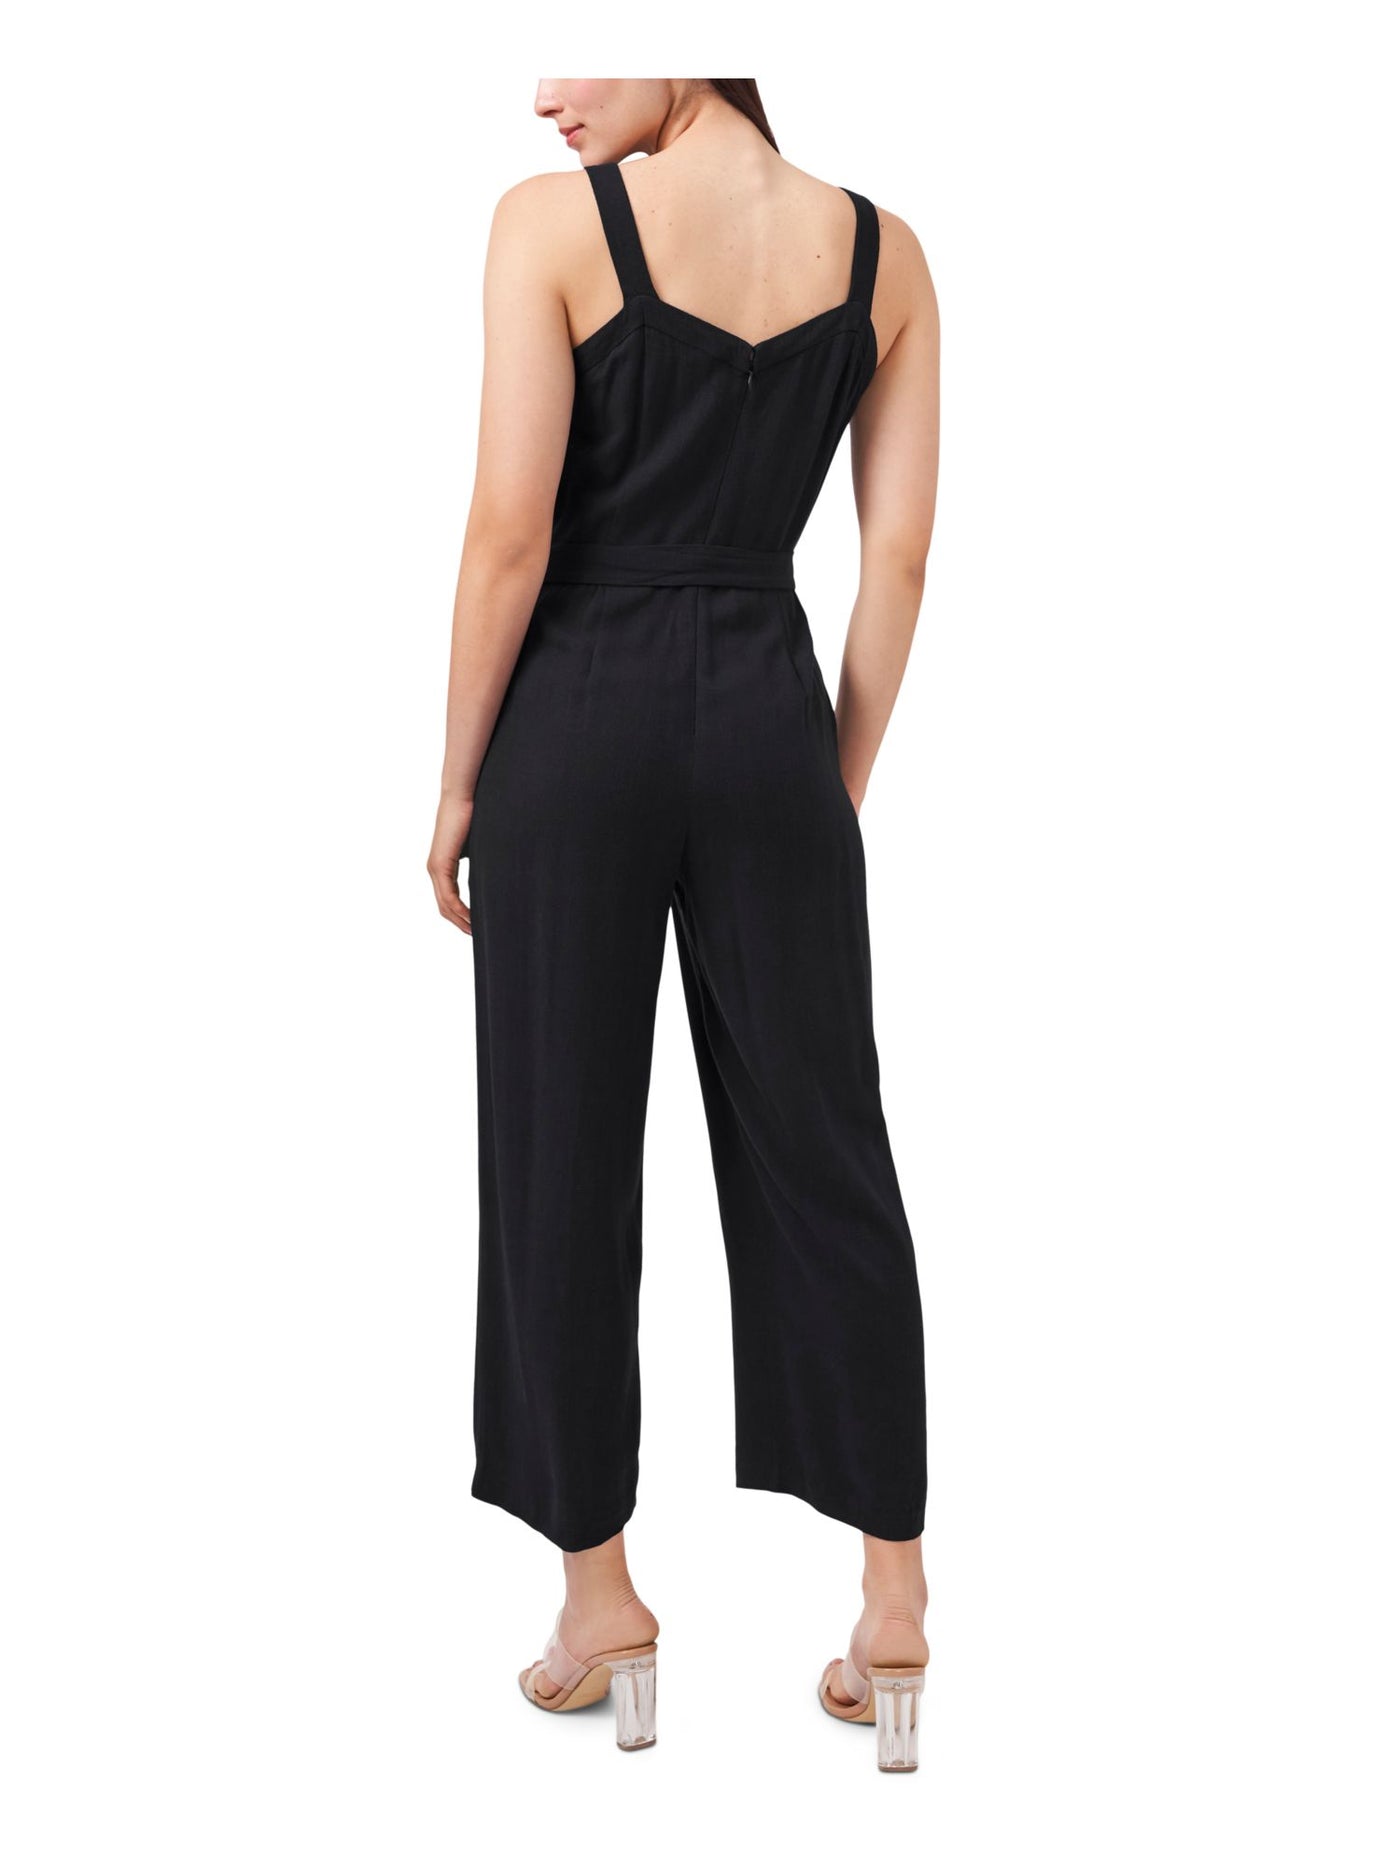 RILEY&RAE Womens Black Zippered Belted Buttoned Pocketed Sleeveless V Neck Wide Leg Jumpsuit 6